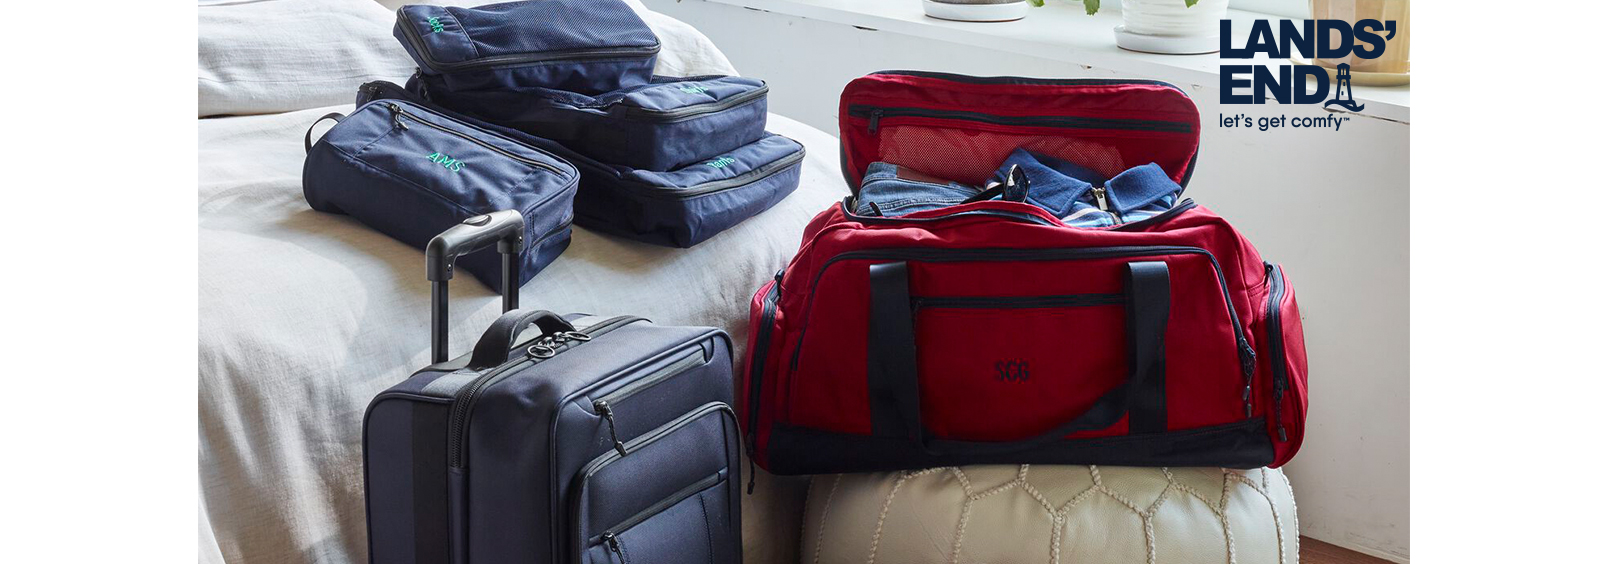 How to Properly Pack Many Coats and Jackets Without Taking Up Too Much Space in Your Suitcases